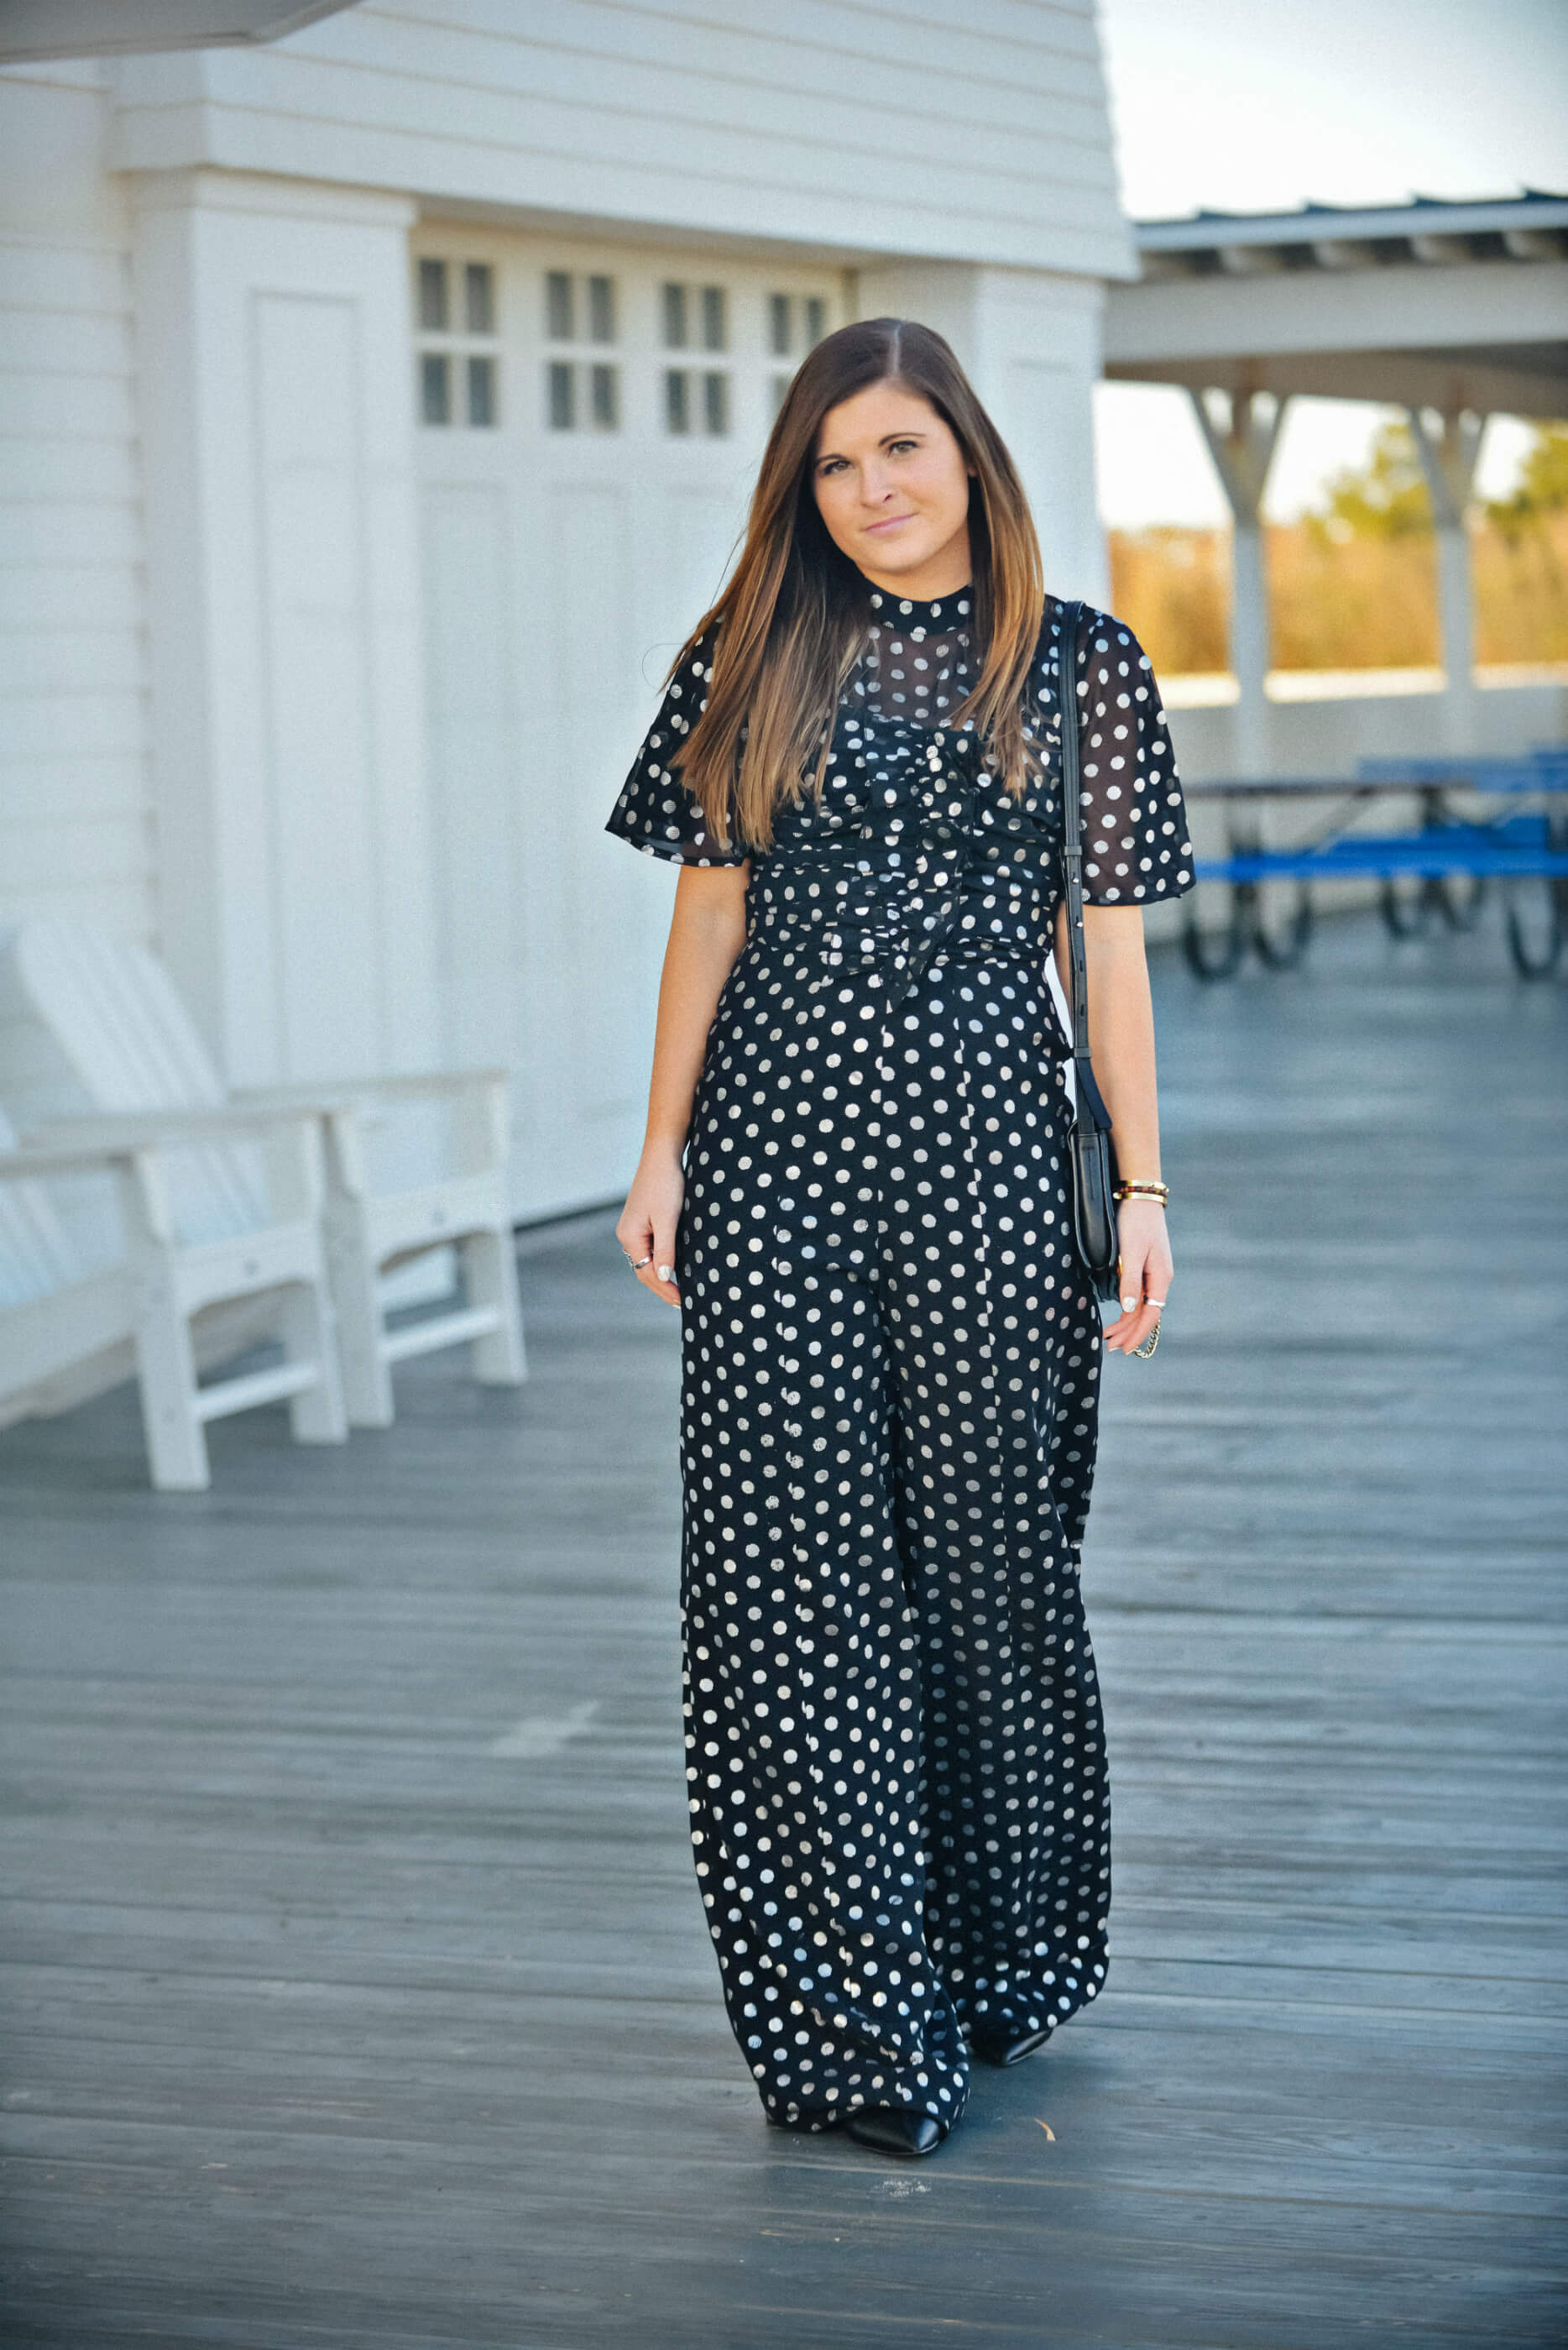 ASOS Metallic Dot Jumpsuit, Polka-Dot Jumpsuit, New Year's Eve Outfit Idea, Tilden of To Be Bright